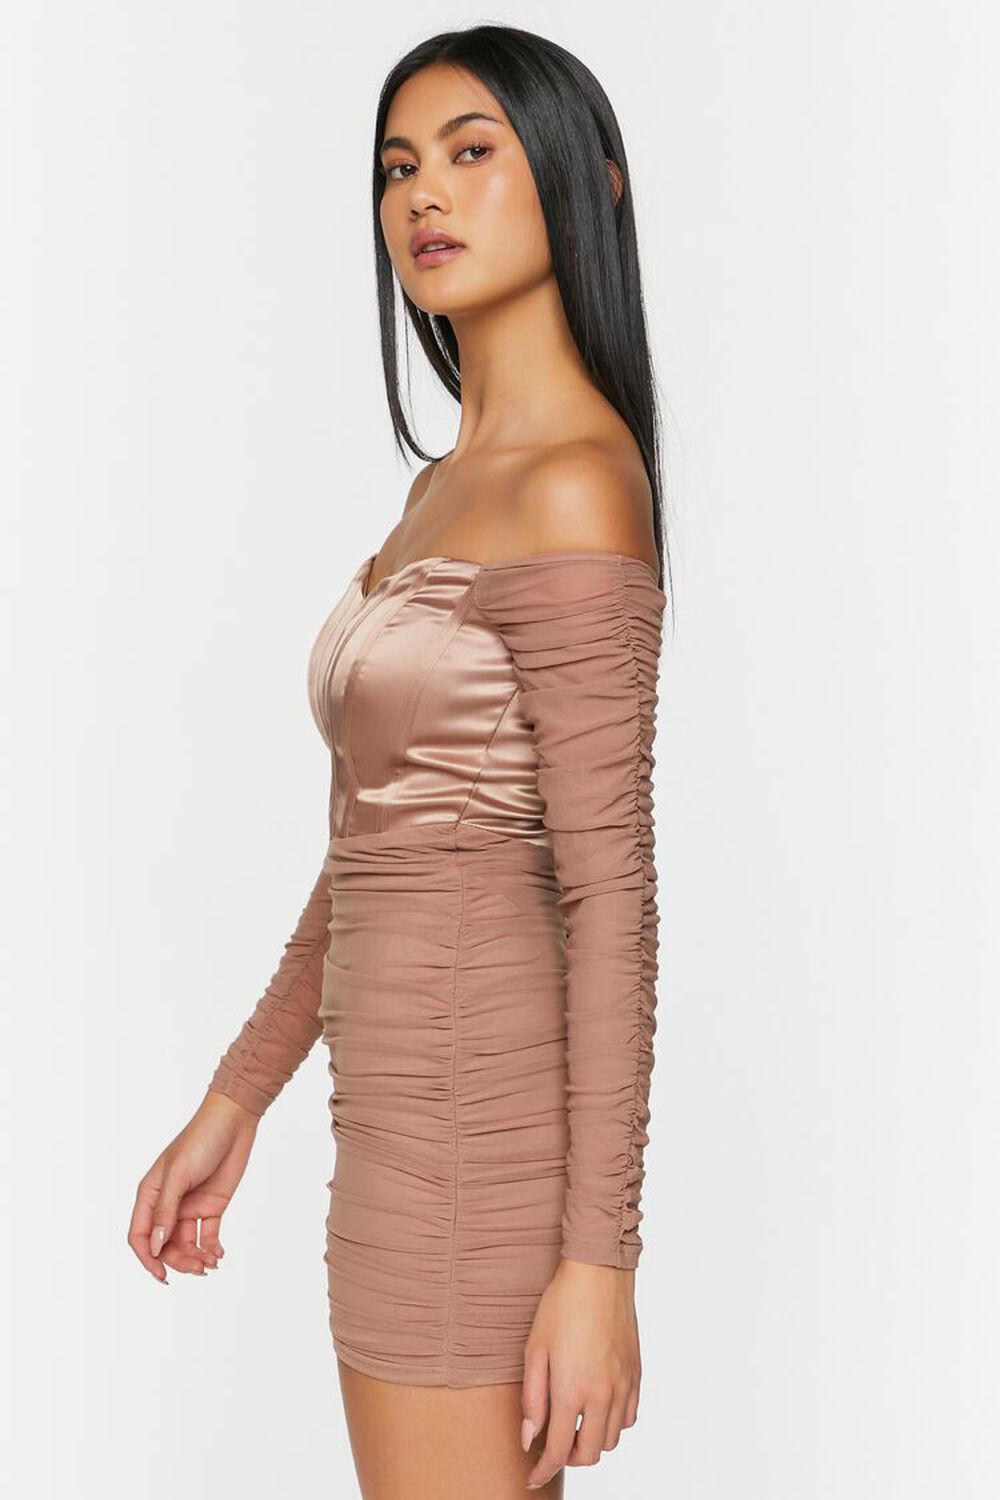 CAPPUCCINO Ruched Mesh Off-the-Shoulder Mini Dress, image 2